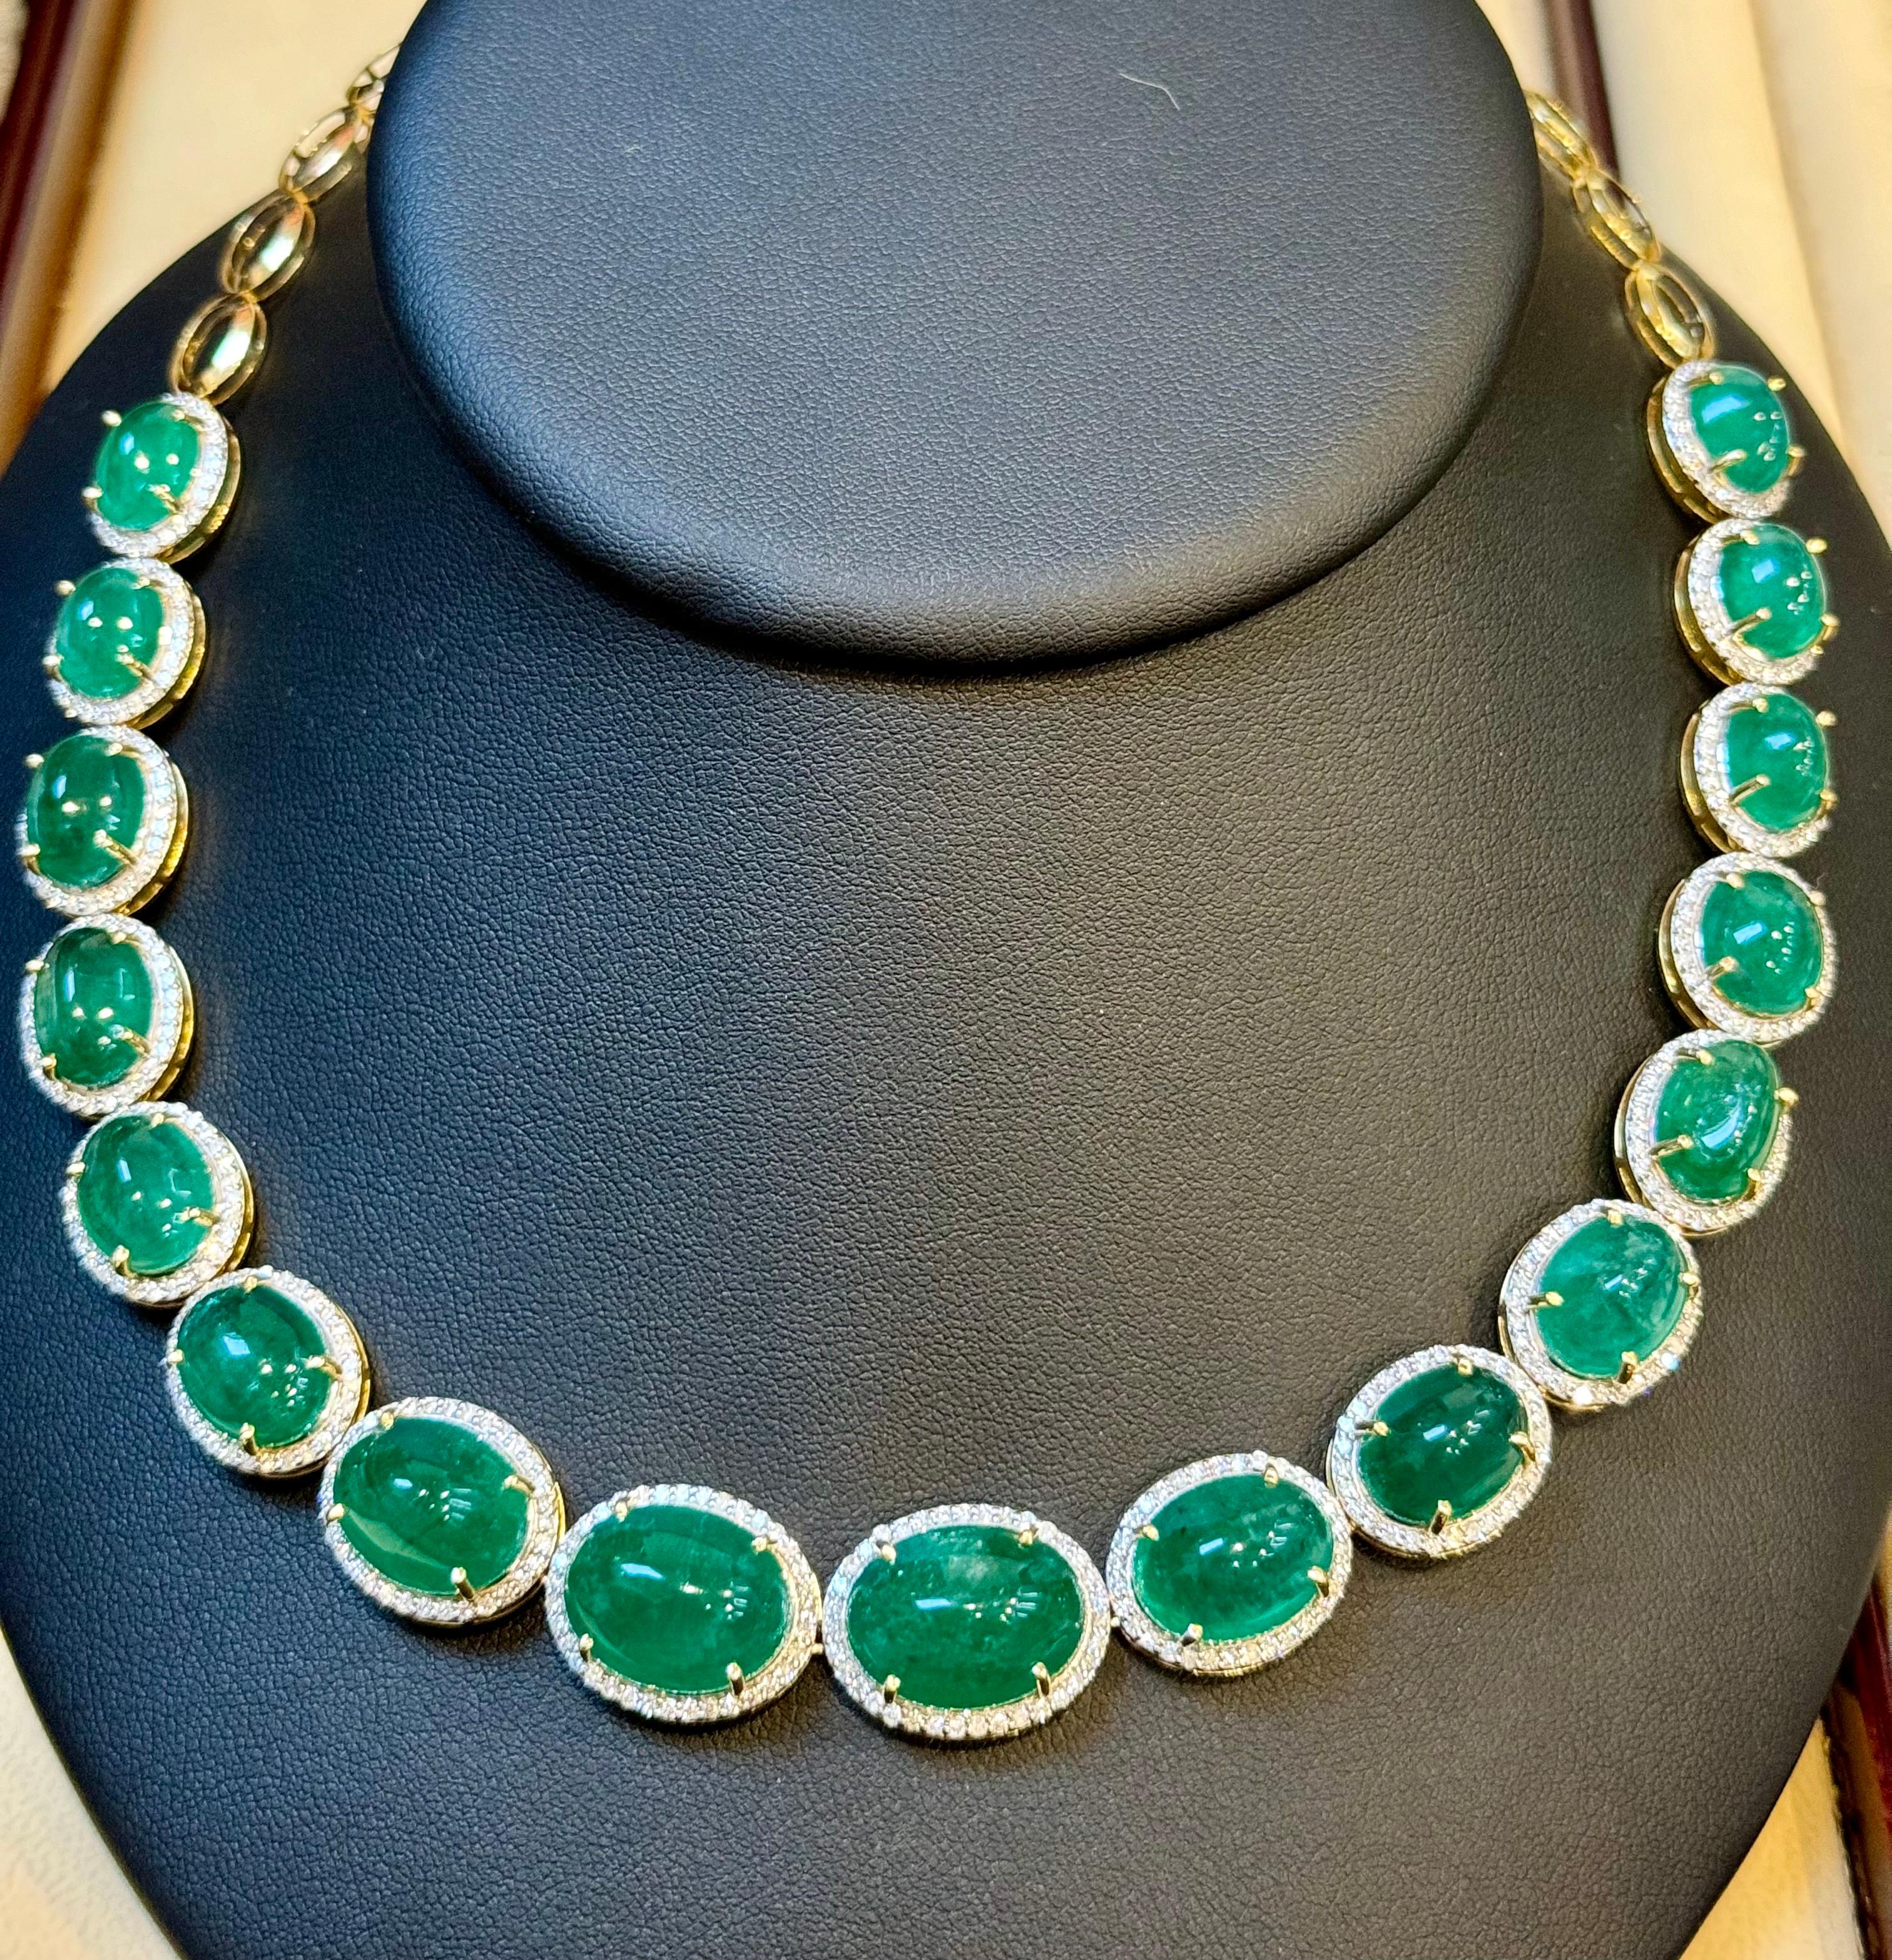 110 Ct Oval Natural Cabochon Emerald & Diamond Necklace, Earring Suite 14 K Gold For Sale 5